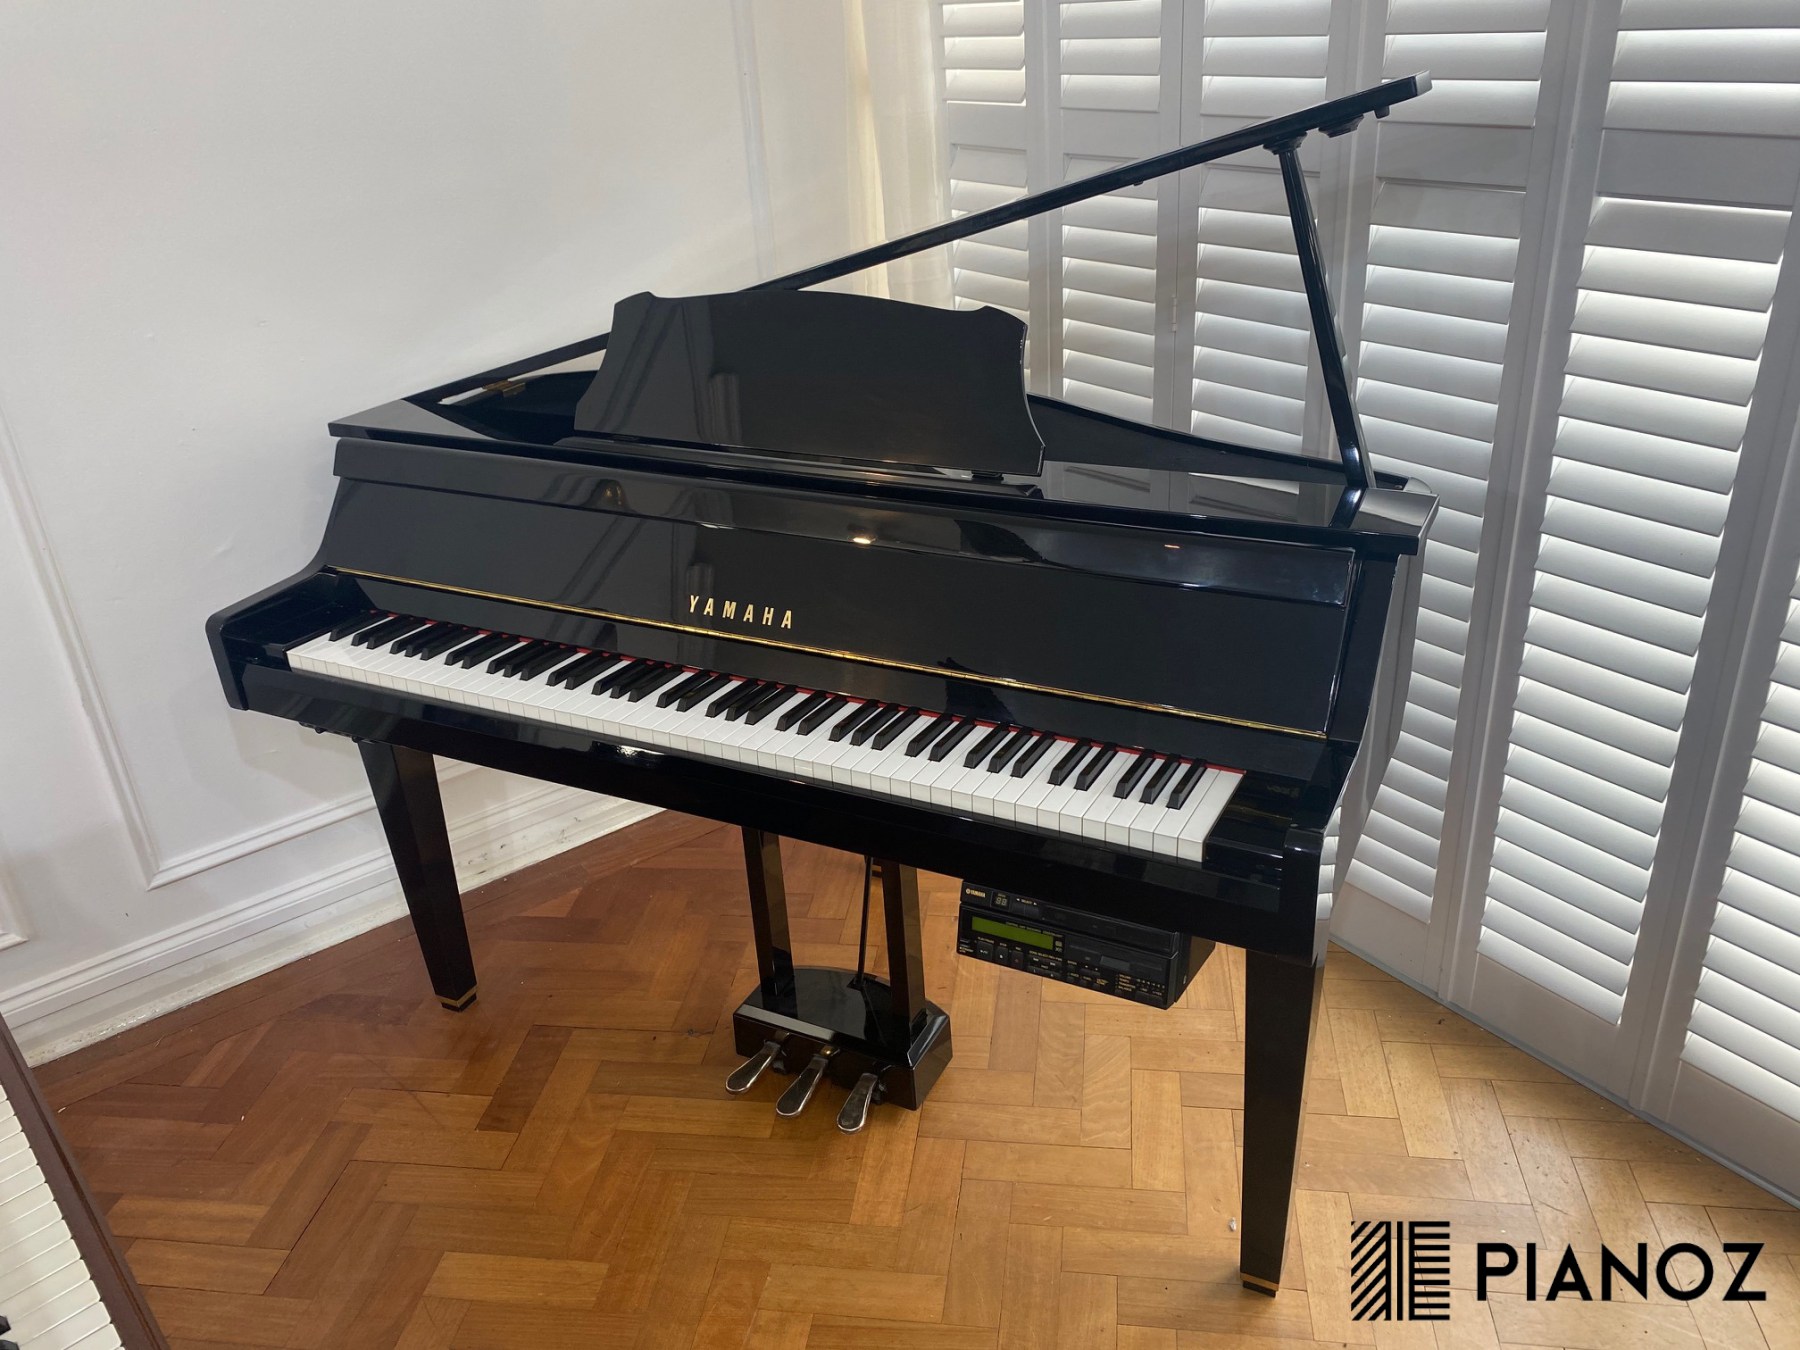 Yamaha Self Playing Digital Baby Grand Piano piano for sale in UK